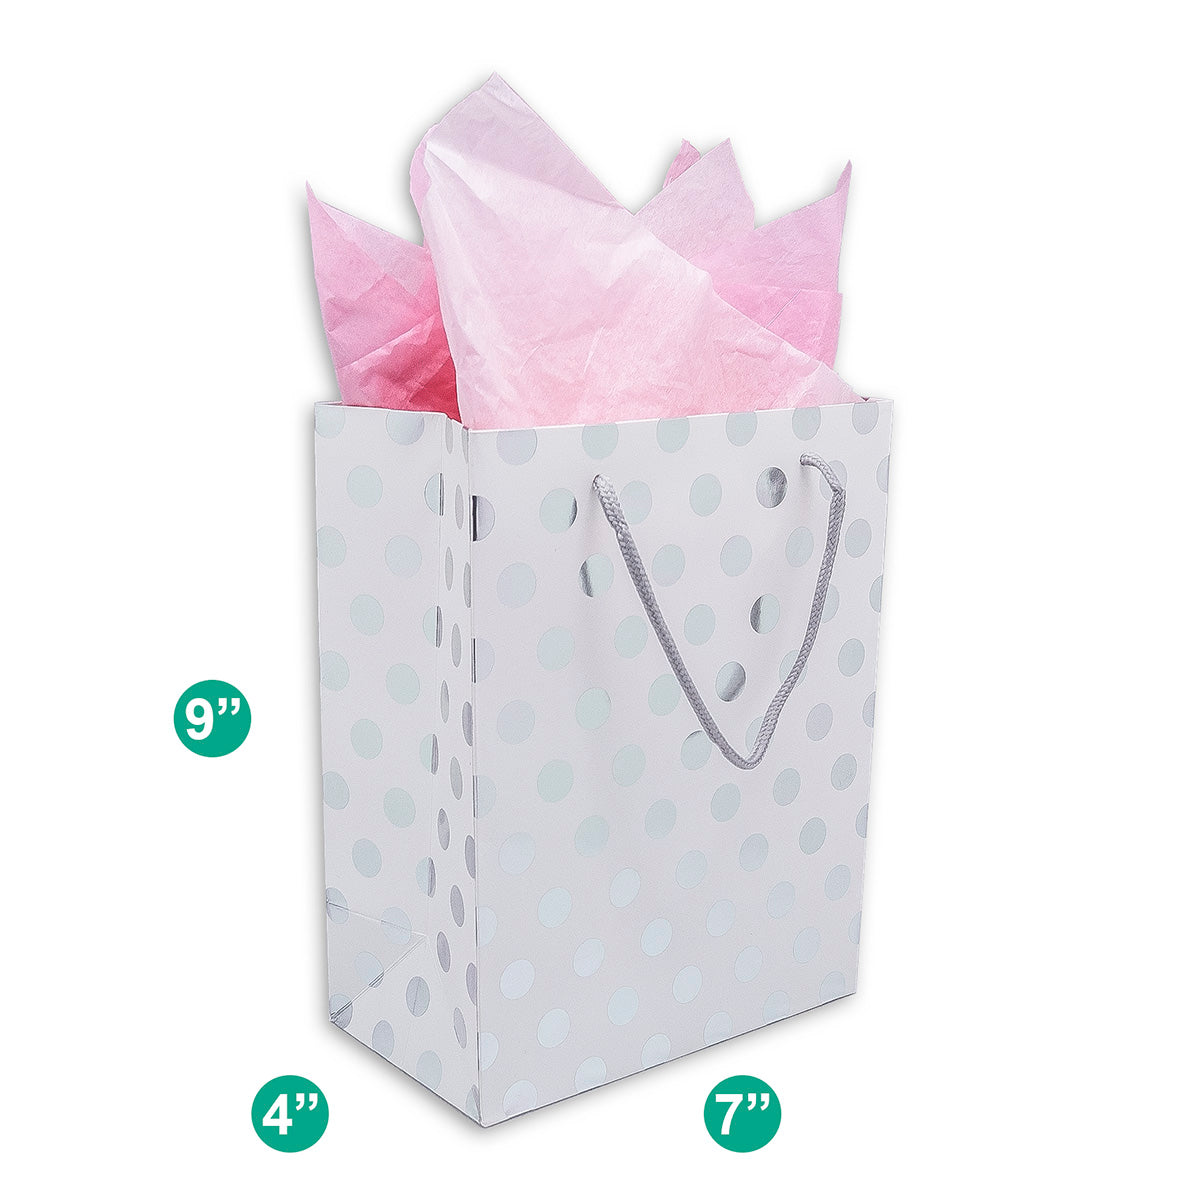 White and Silver Polka Dot Gift Bags (12-Pack)